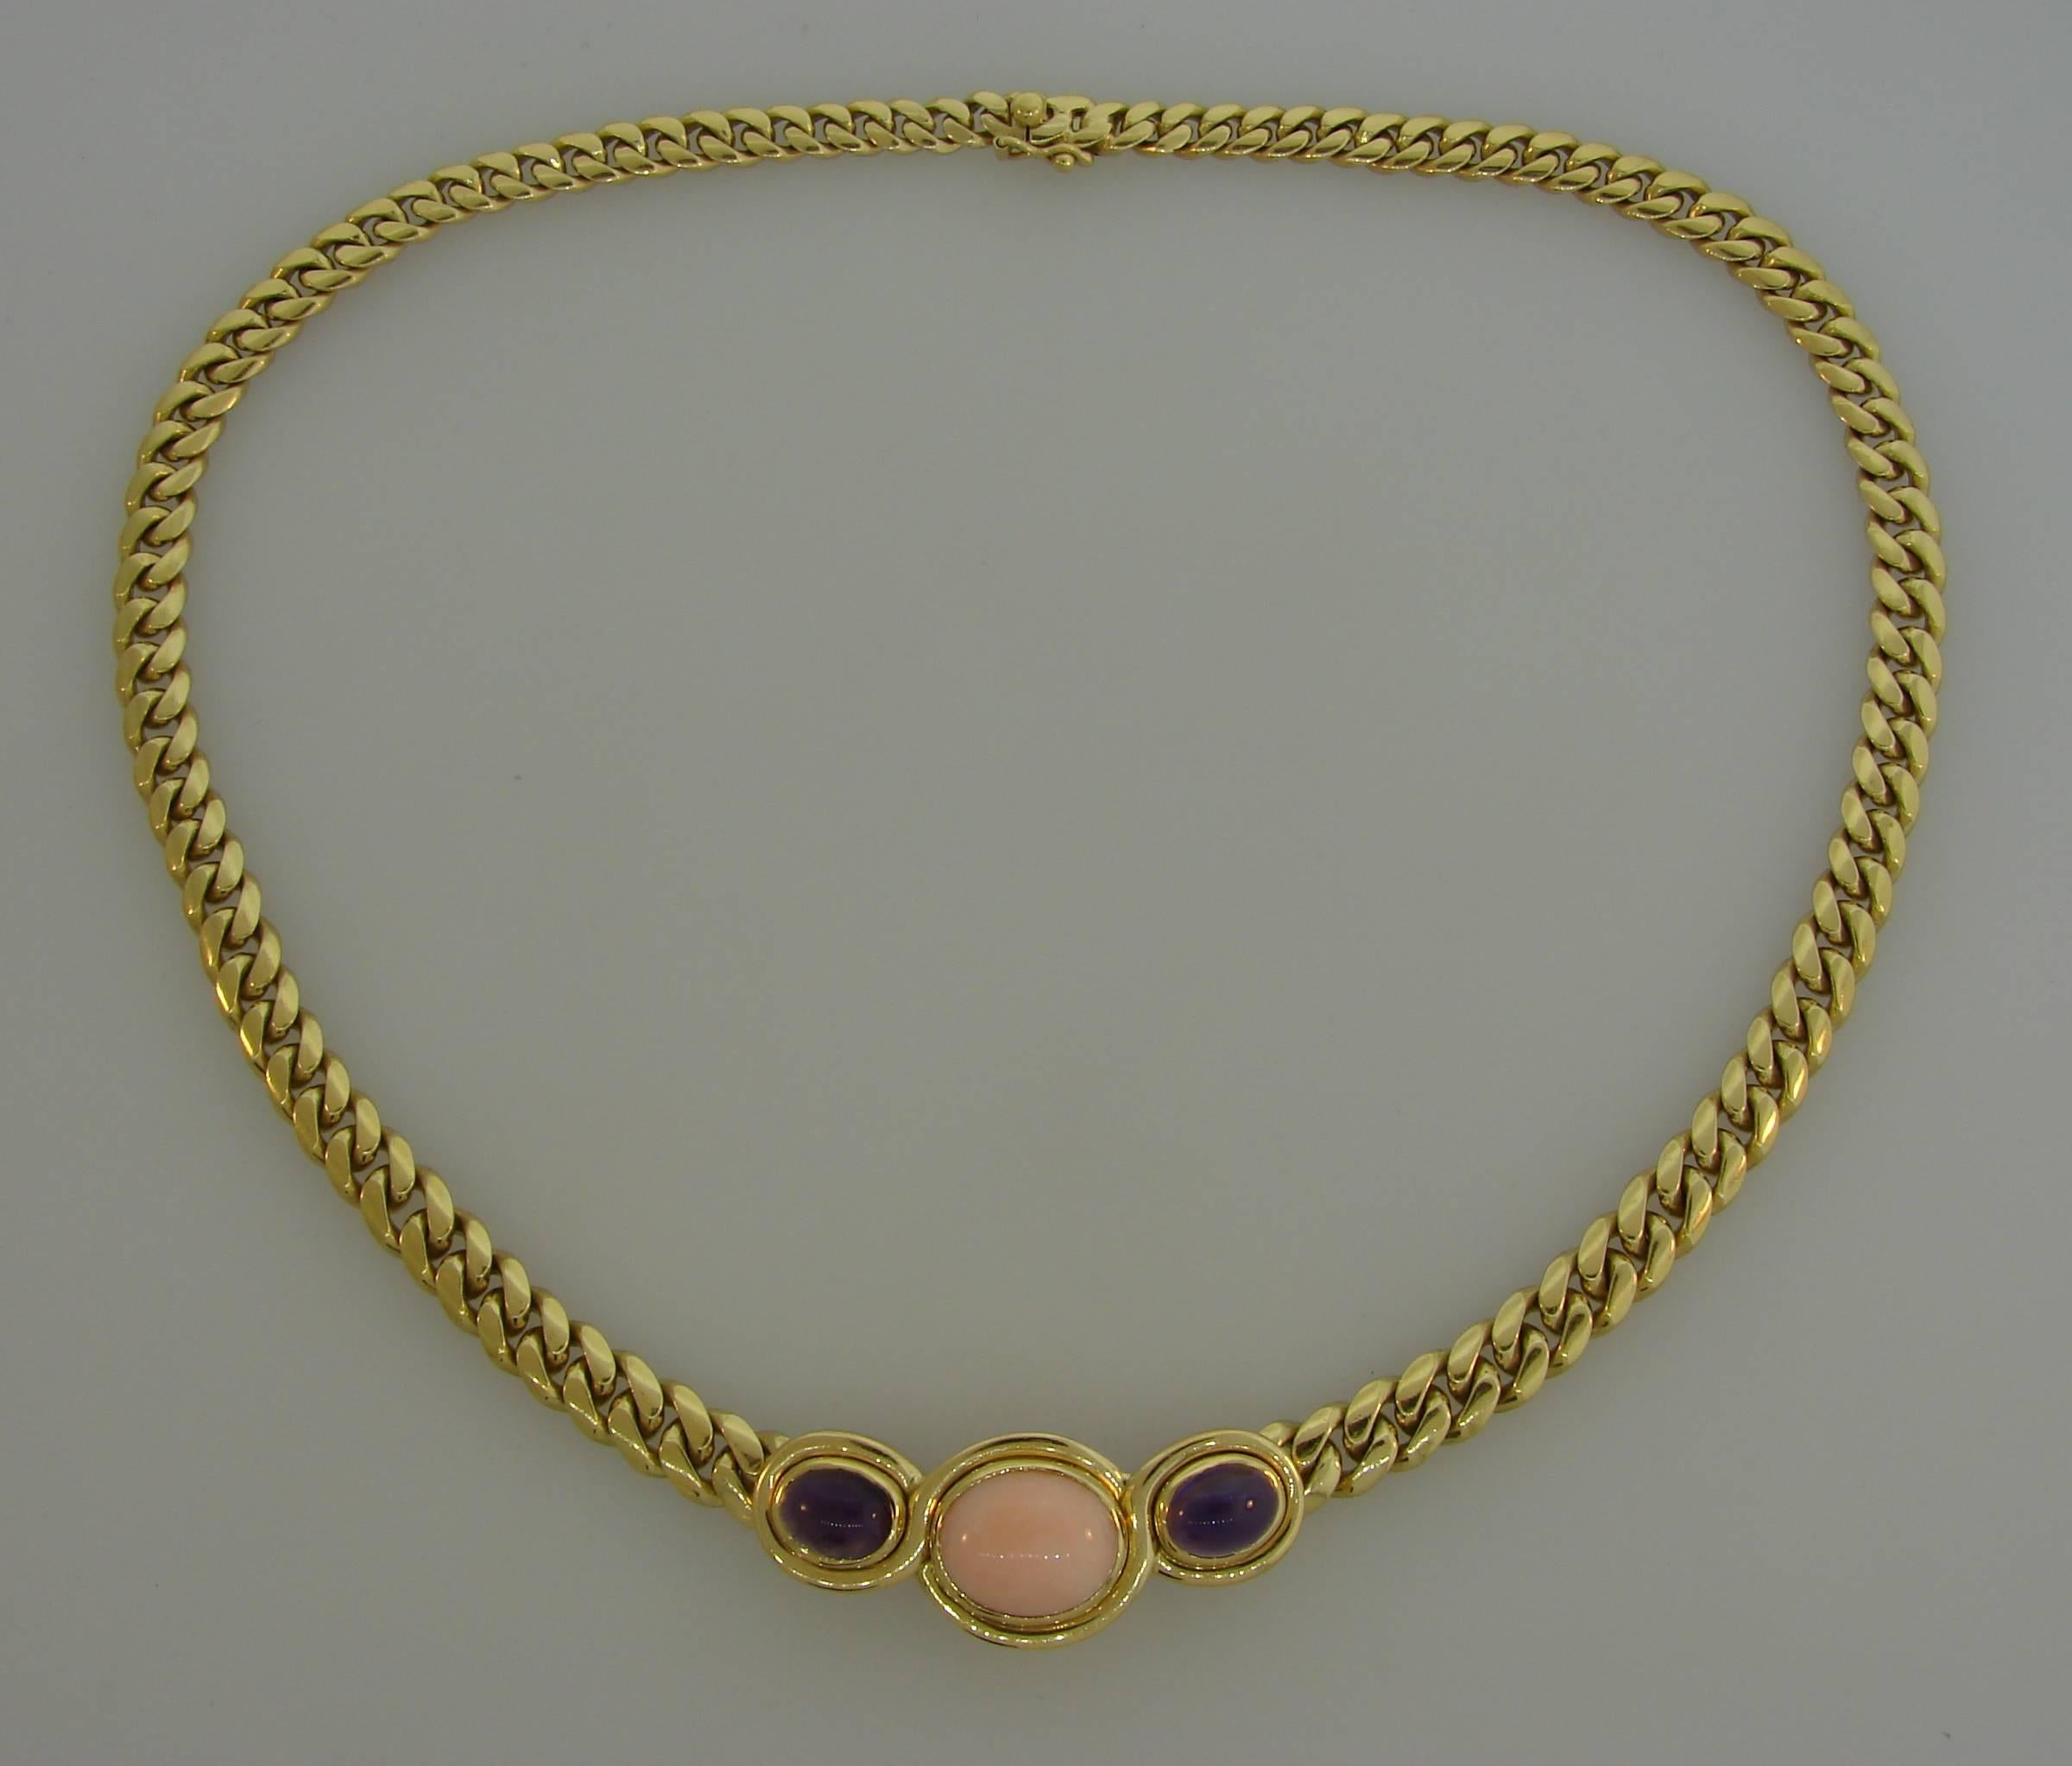 Bold yet elegant necklace created by Bulgari in Italy in the 1980s. Chic and wearable, it is a great addition to your jewelry collection. 
The necklace is made of 18 karat yellow gold and set with an oval cabochon coral and two oval cabochon